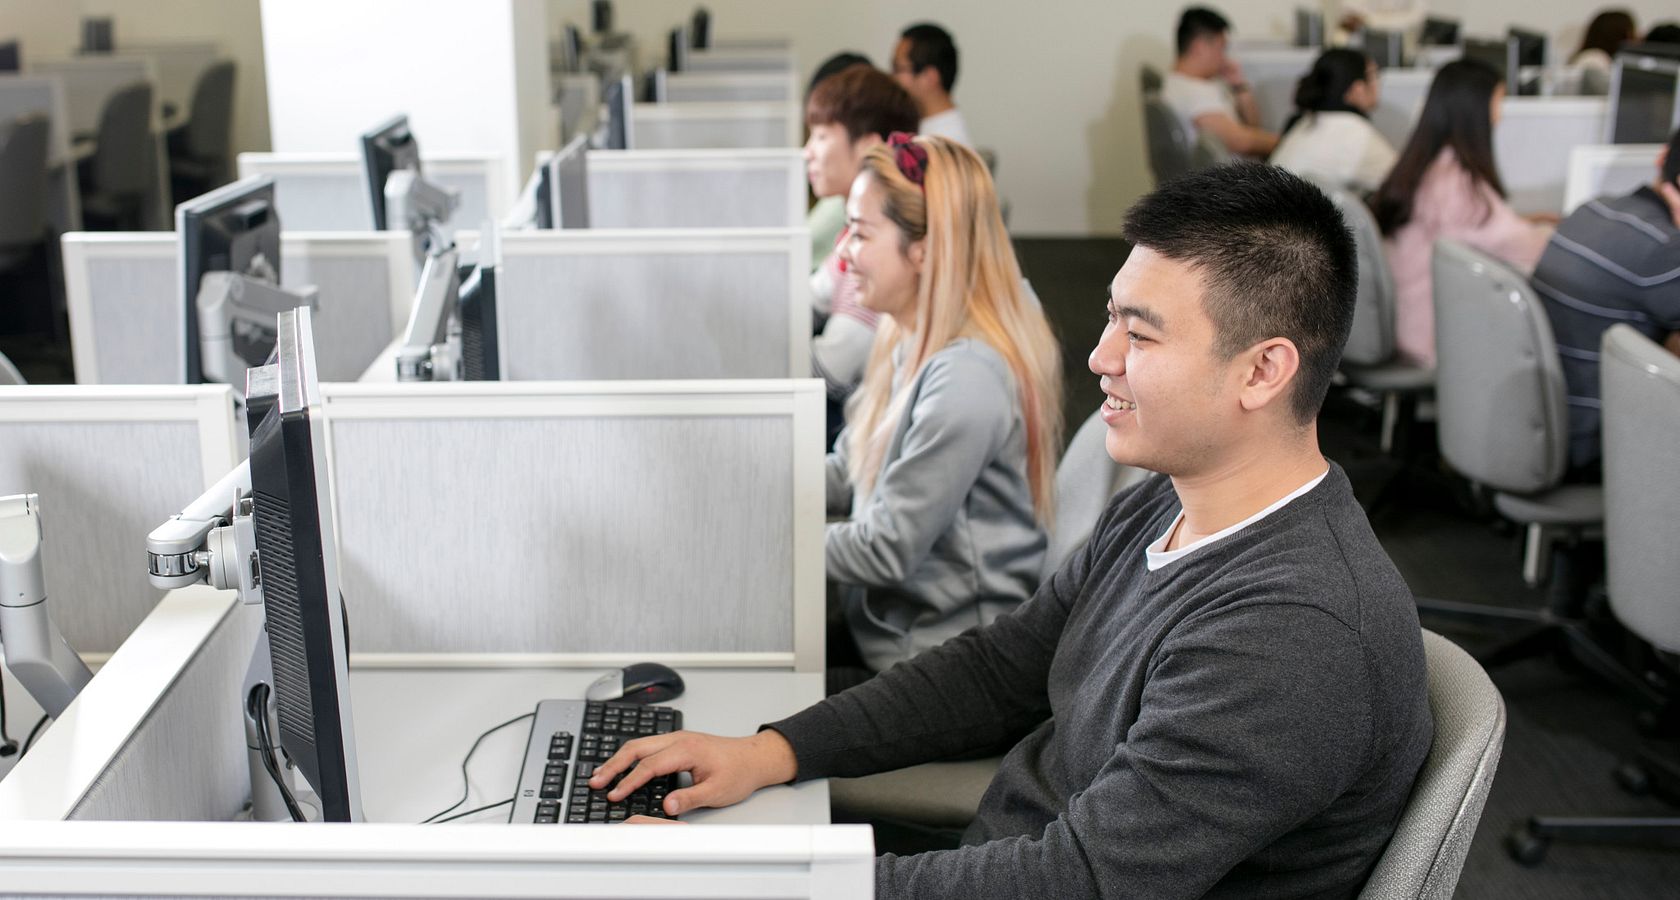 picture of a group of people taking the computer-delivered IELTS test